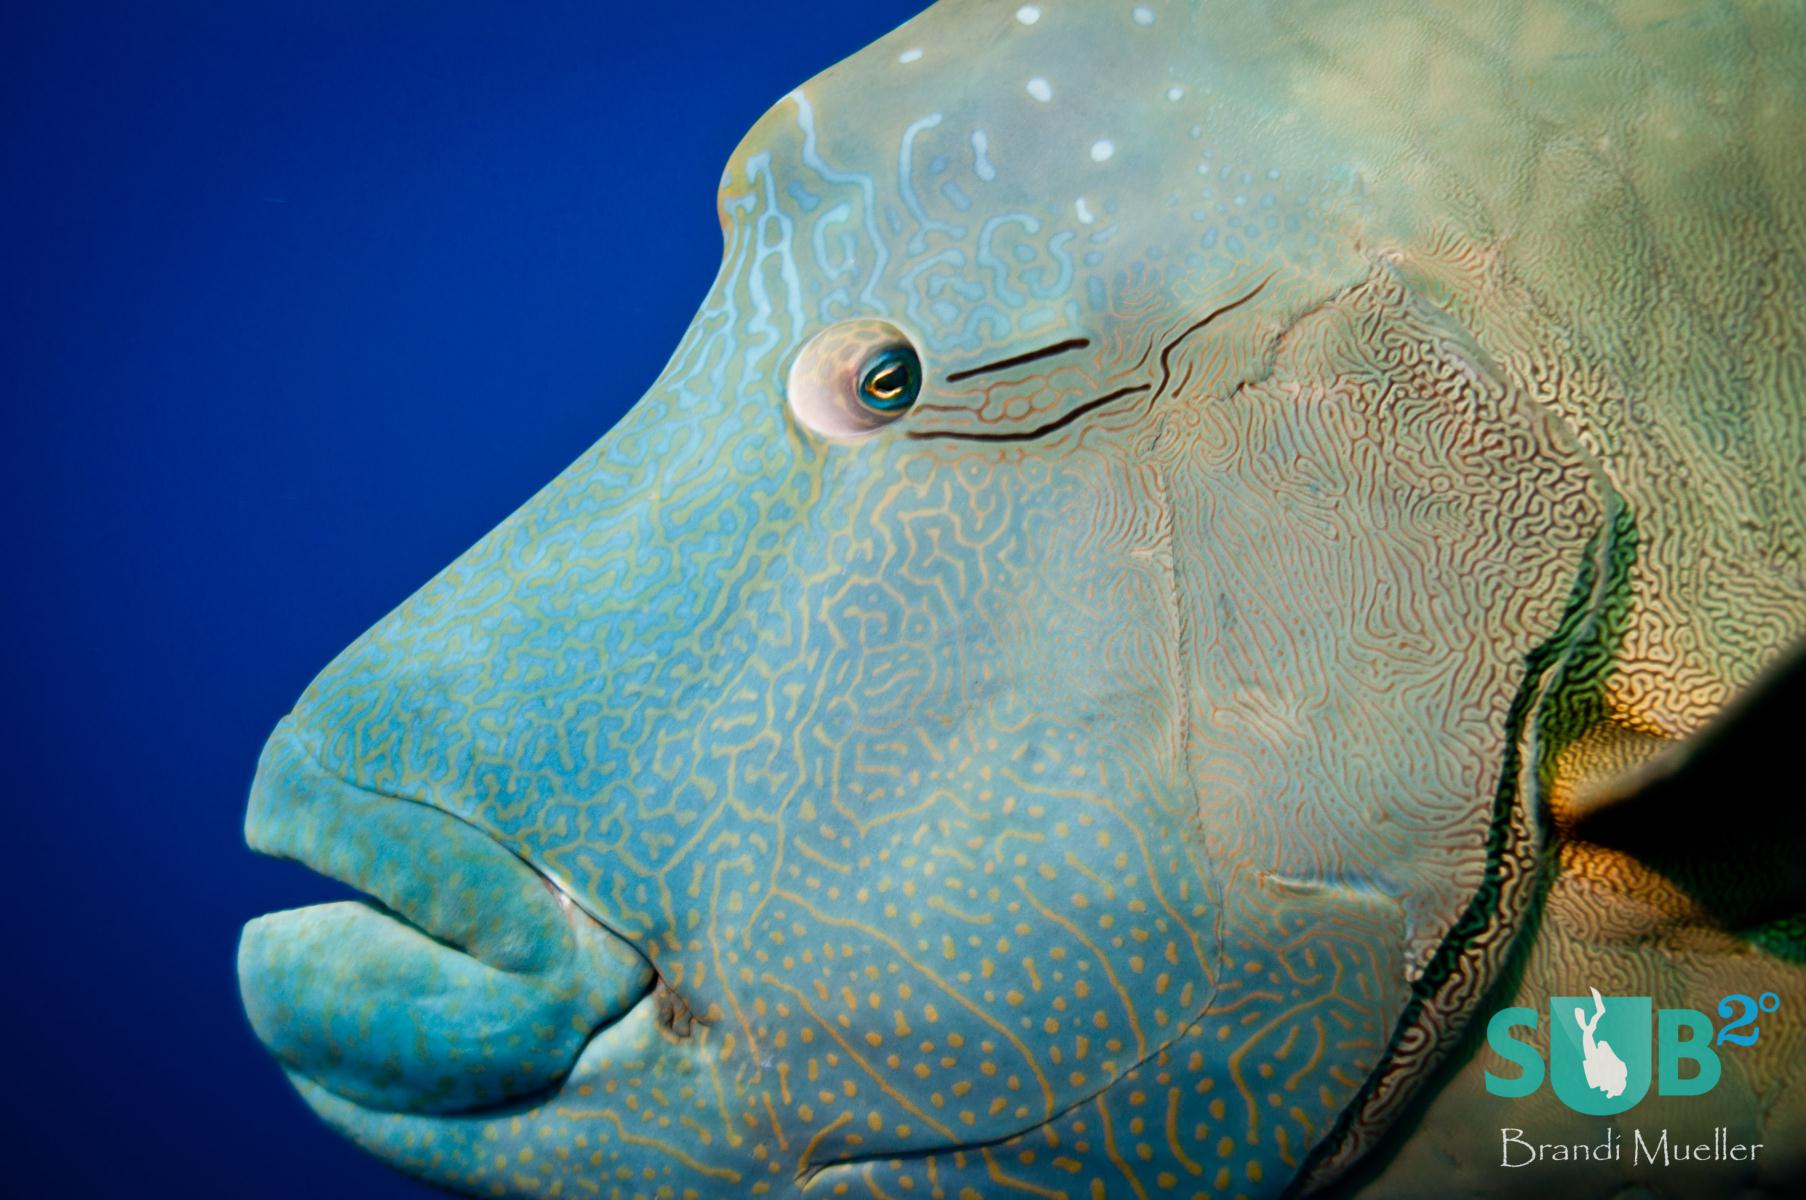 Friendly and large, the napolean wrasses act almost like puppy dogs at Blue Corner, coming very close to divers.